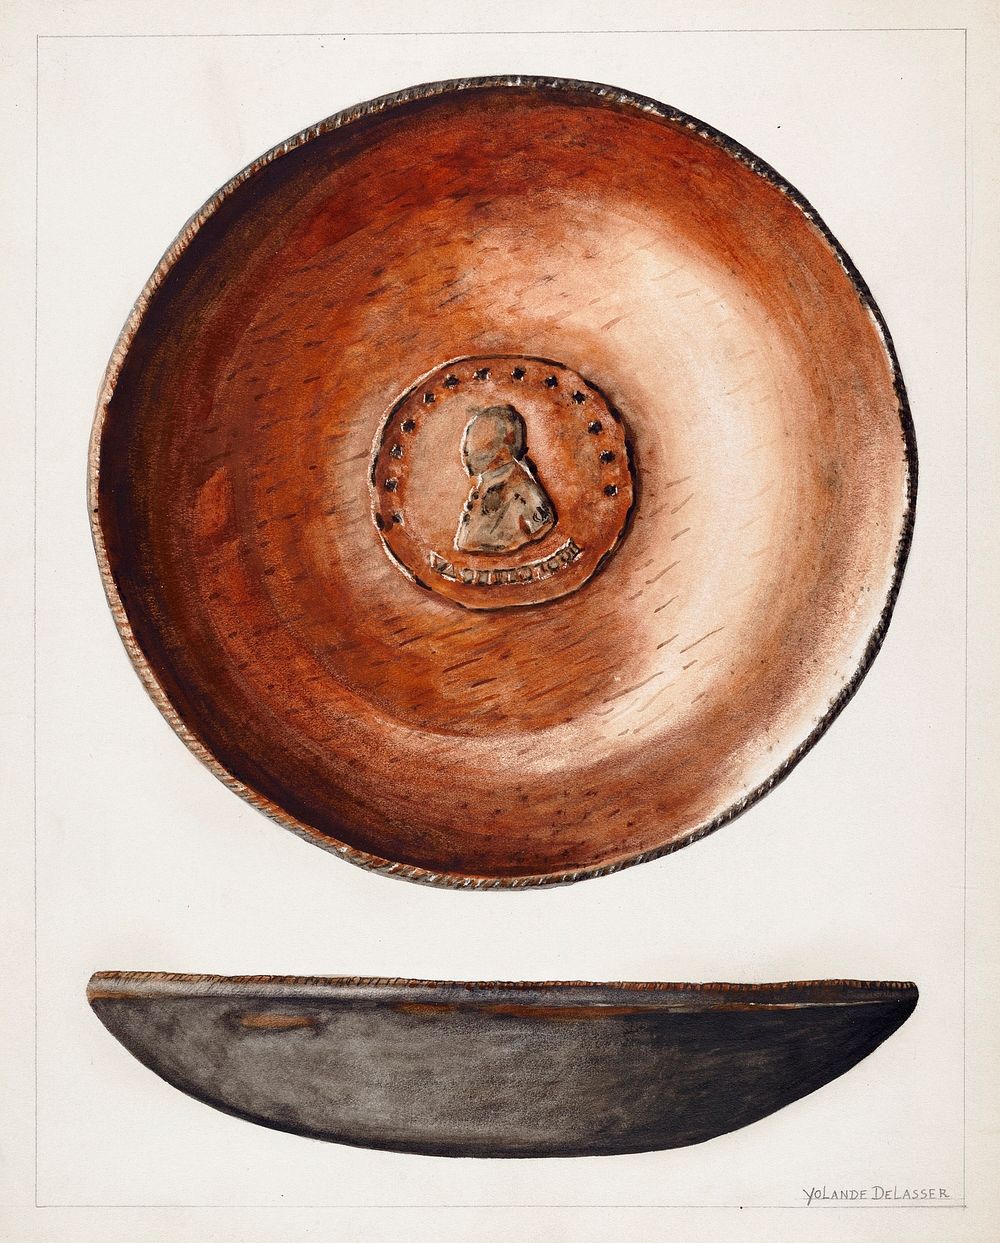 Plate (ca.1937) by Yolande Delasser. Original from The National Gallery of Art. Digitally enhanced by rawpixel.